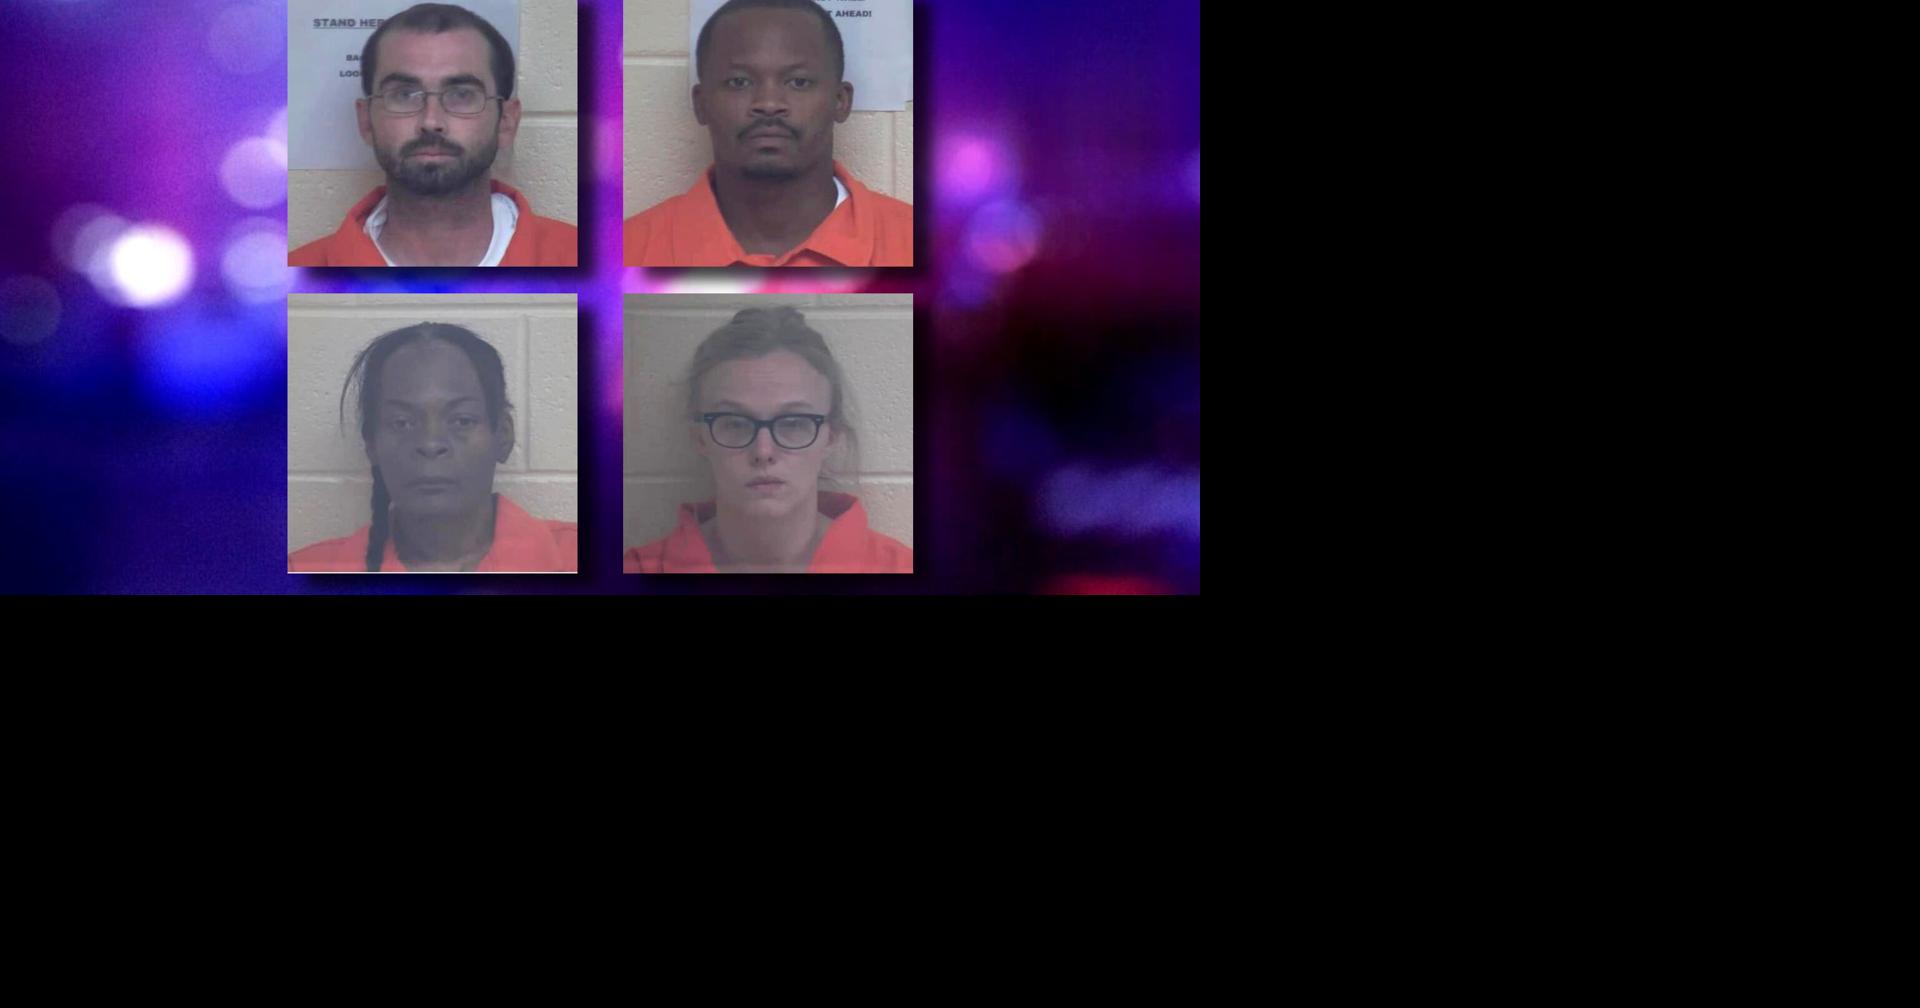 Elementary School Teacher Among Four Arrested on Fentanyl Trafficking Charges in Union County | News